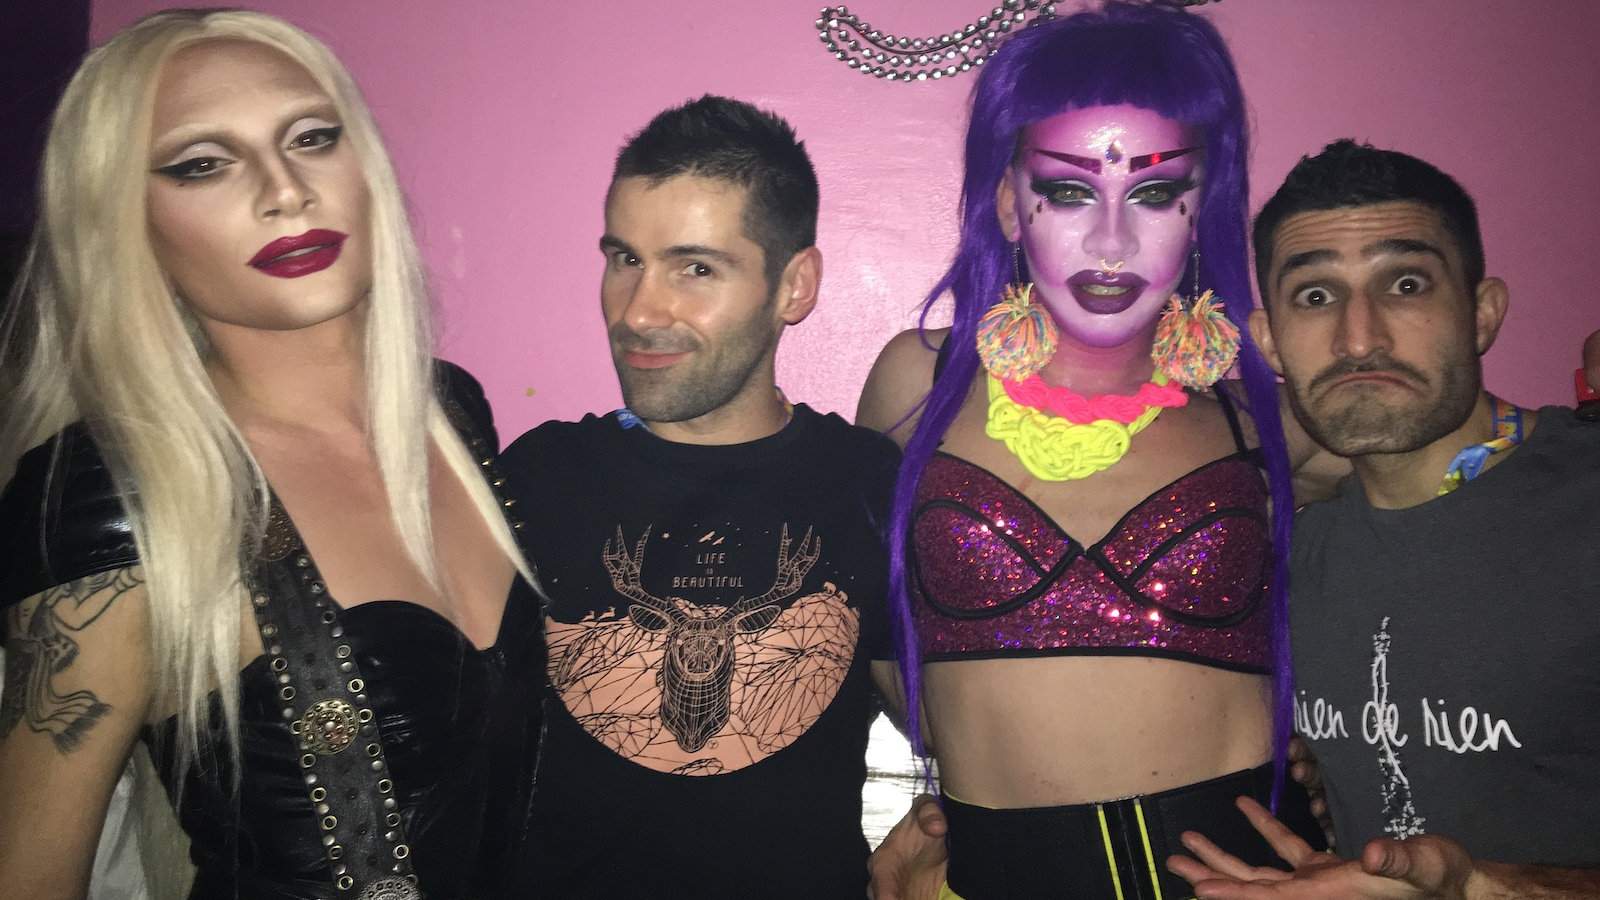 Making new friends with the drag queens of Nice